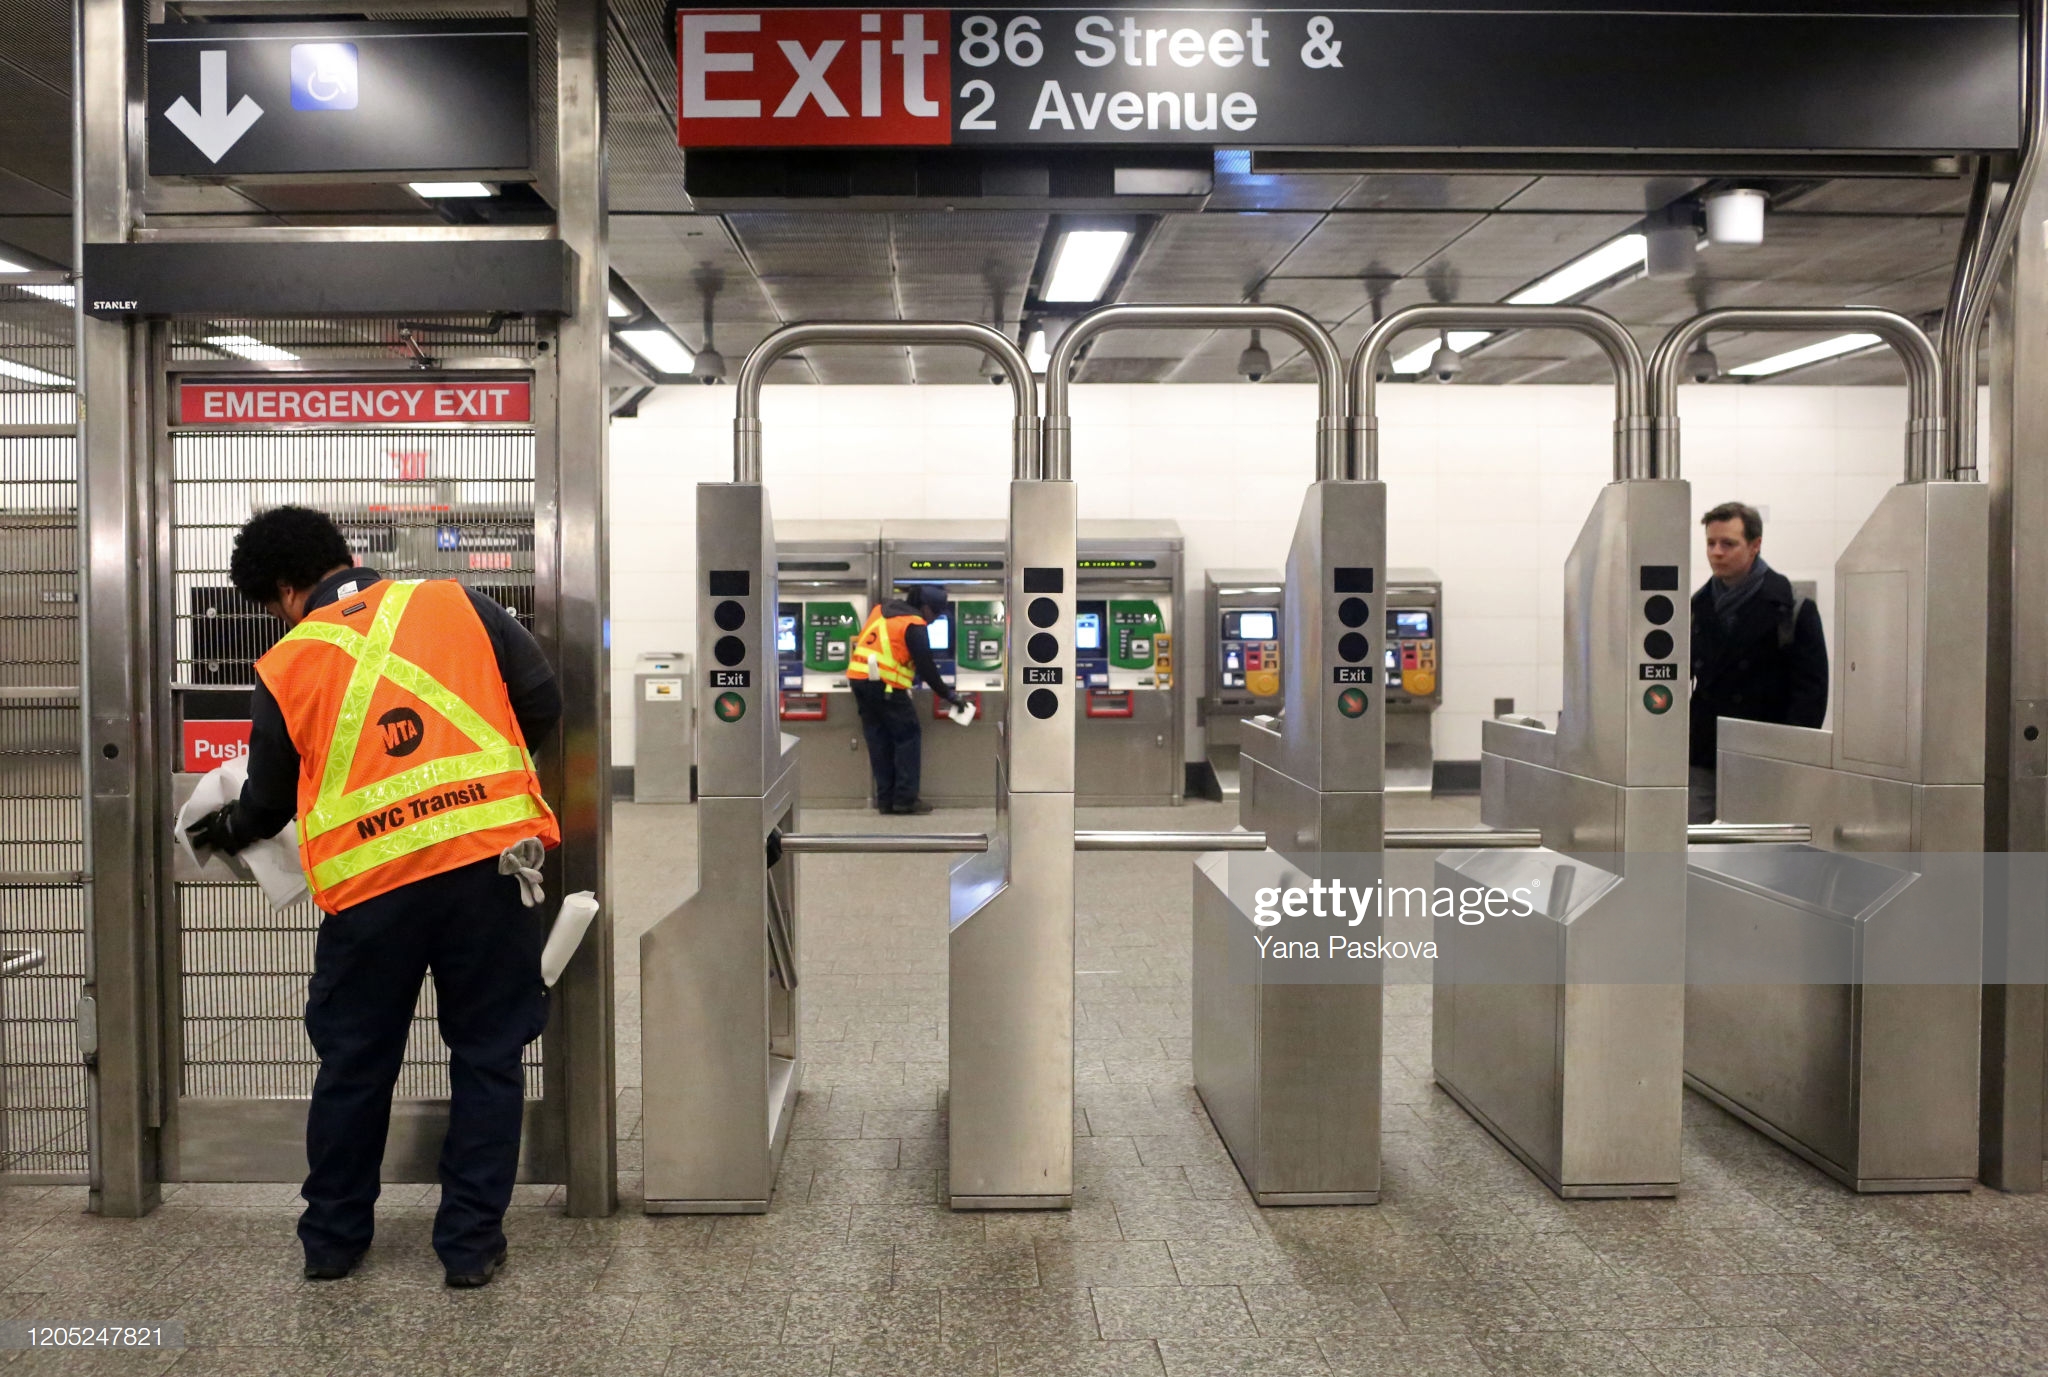 cleaning-staff-disinfect-the-86th-st-q-train-station-on-march-4-2020-picture-id1205247821